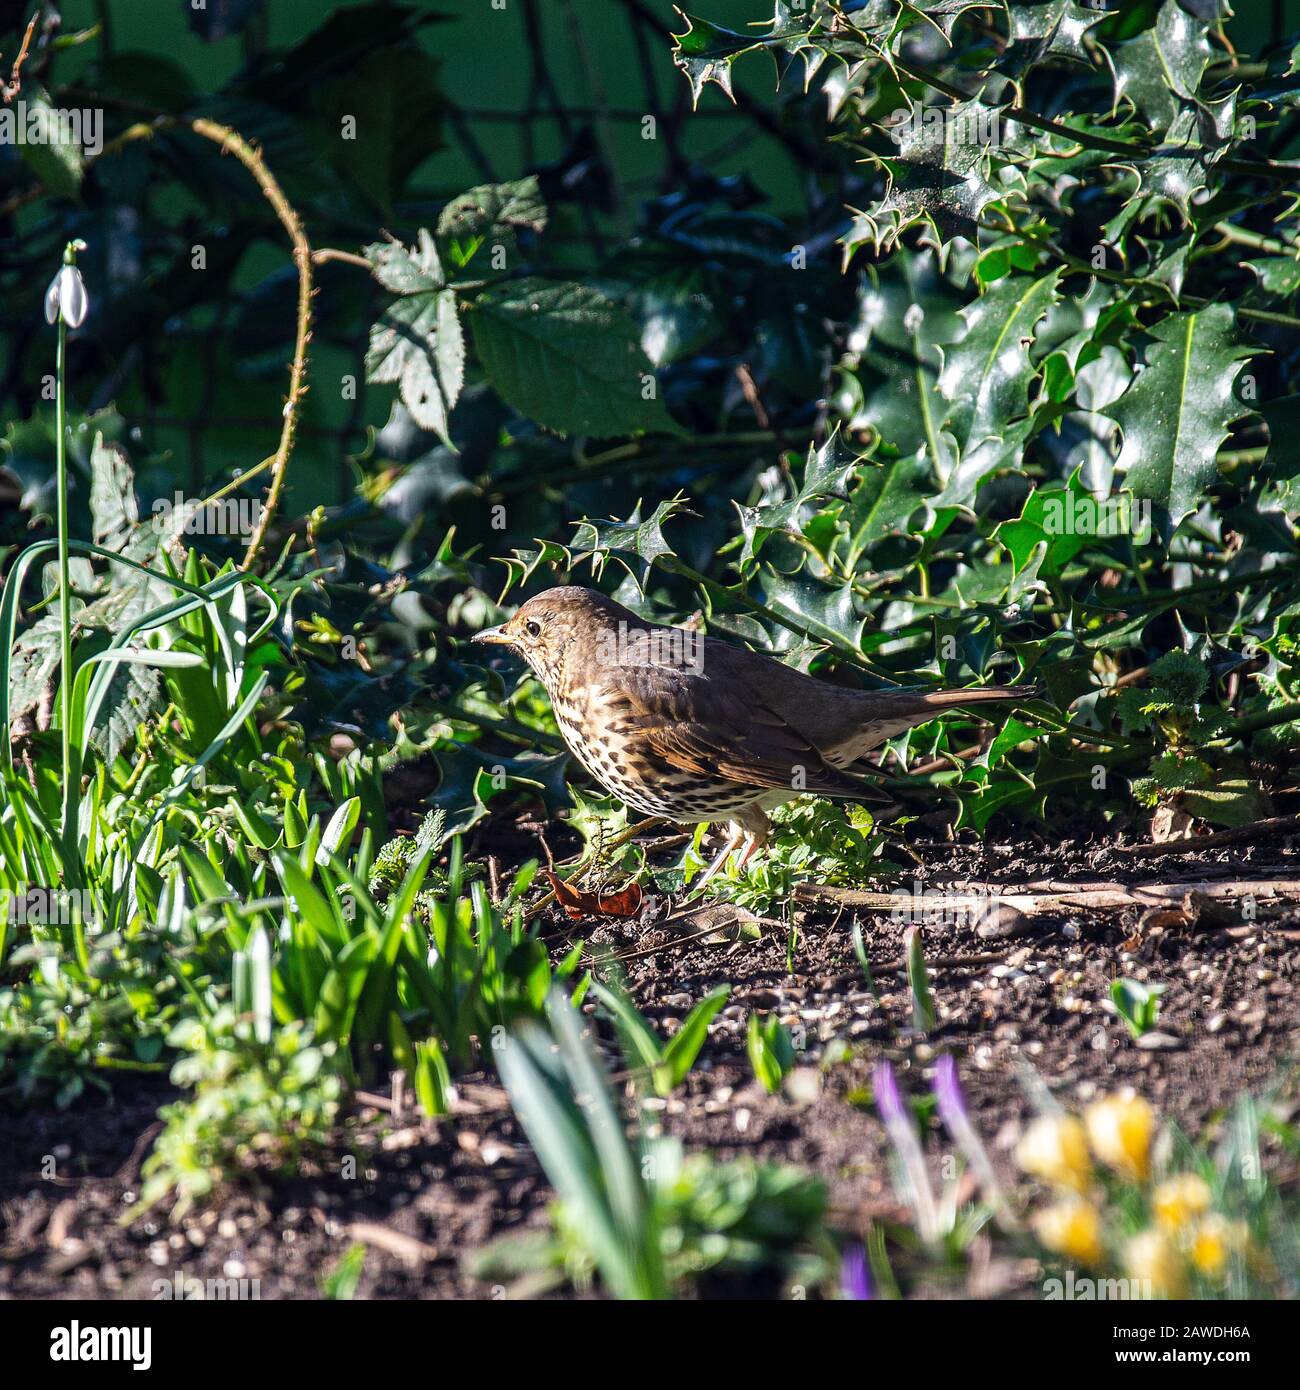 A Beautiful Song Thrush Looking for Food in a Garden in Alsager Cheshire England United Kingdom UK Stock Photo